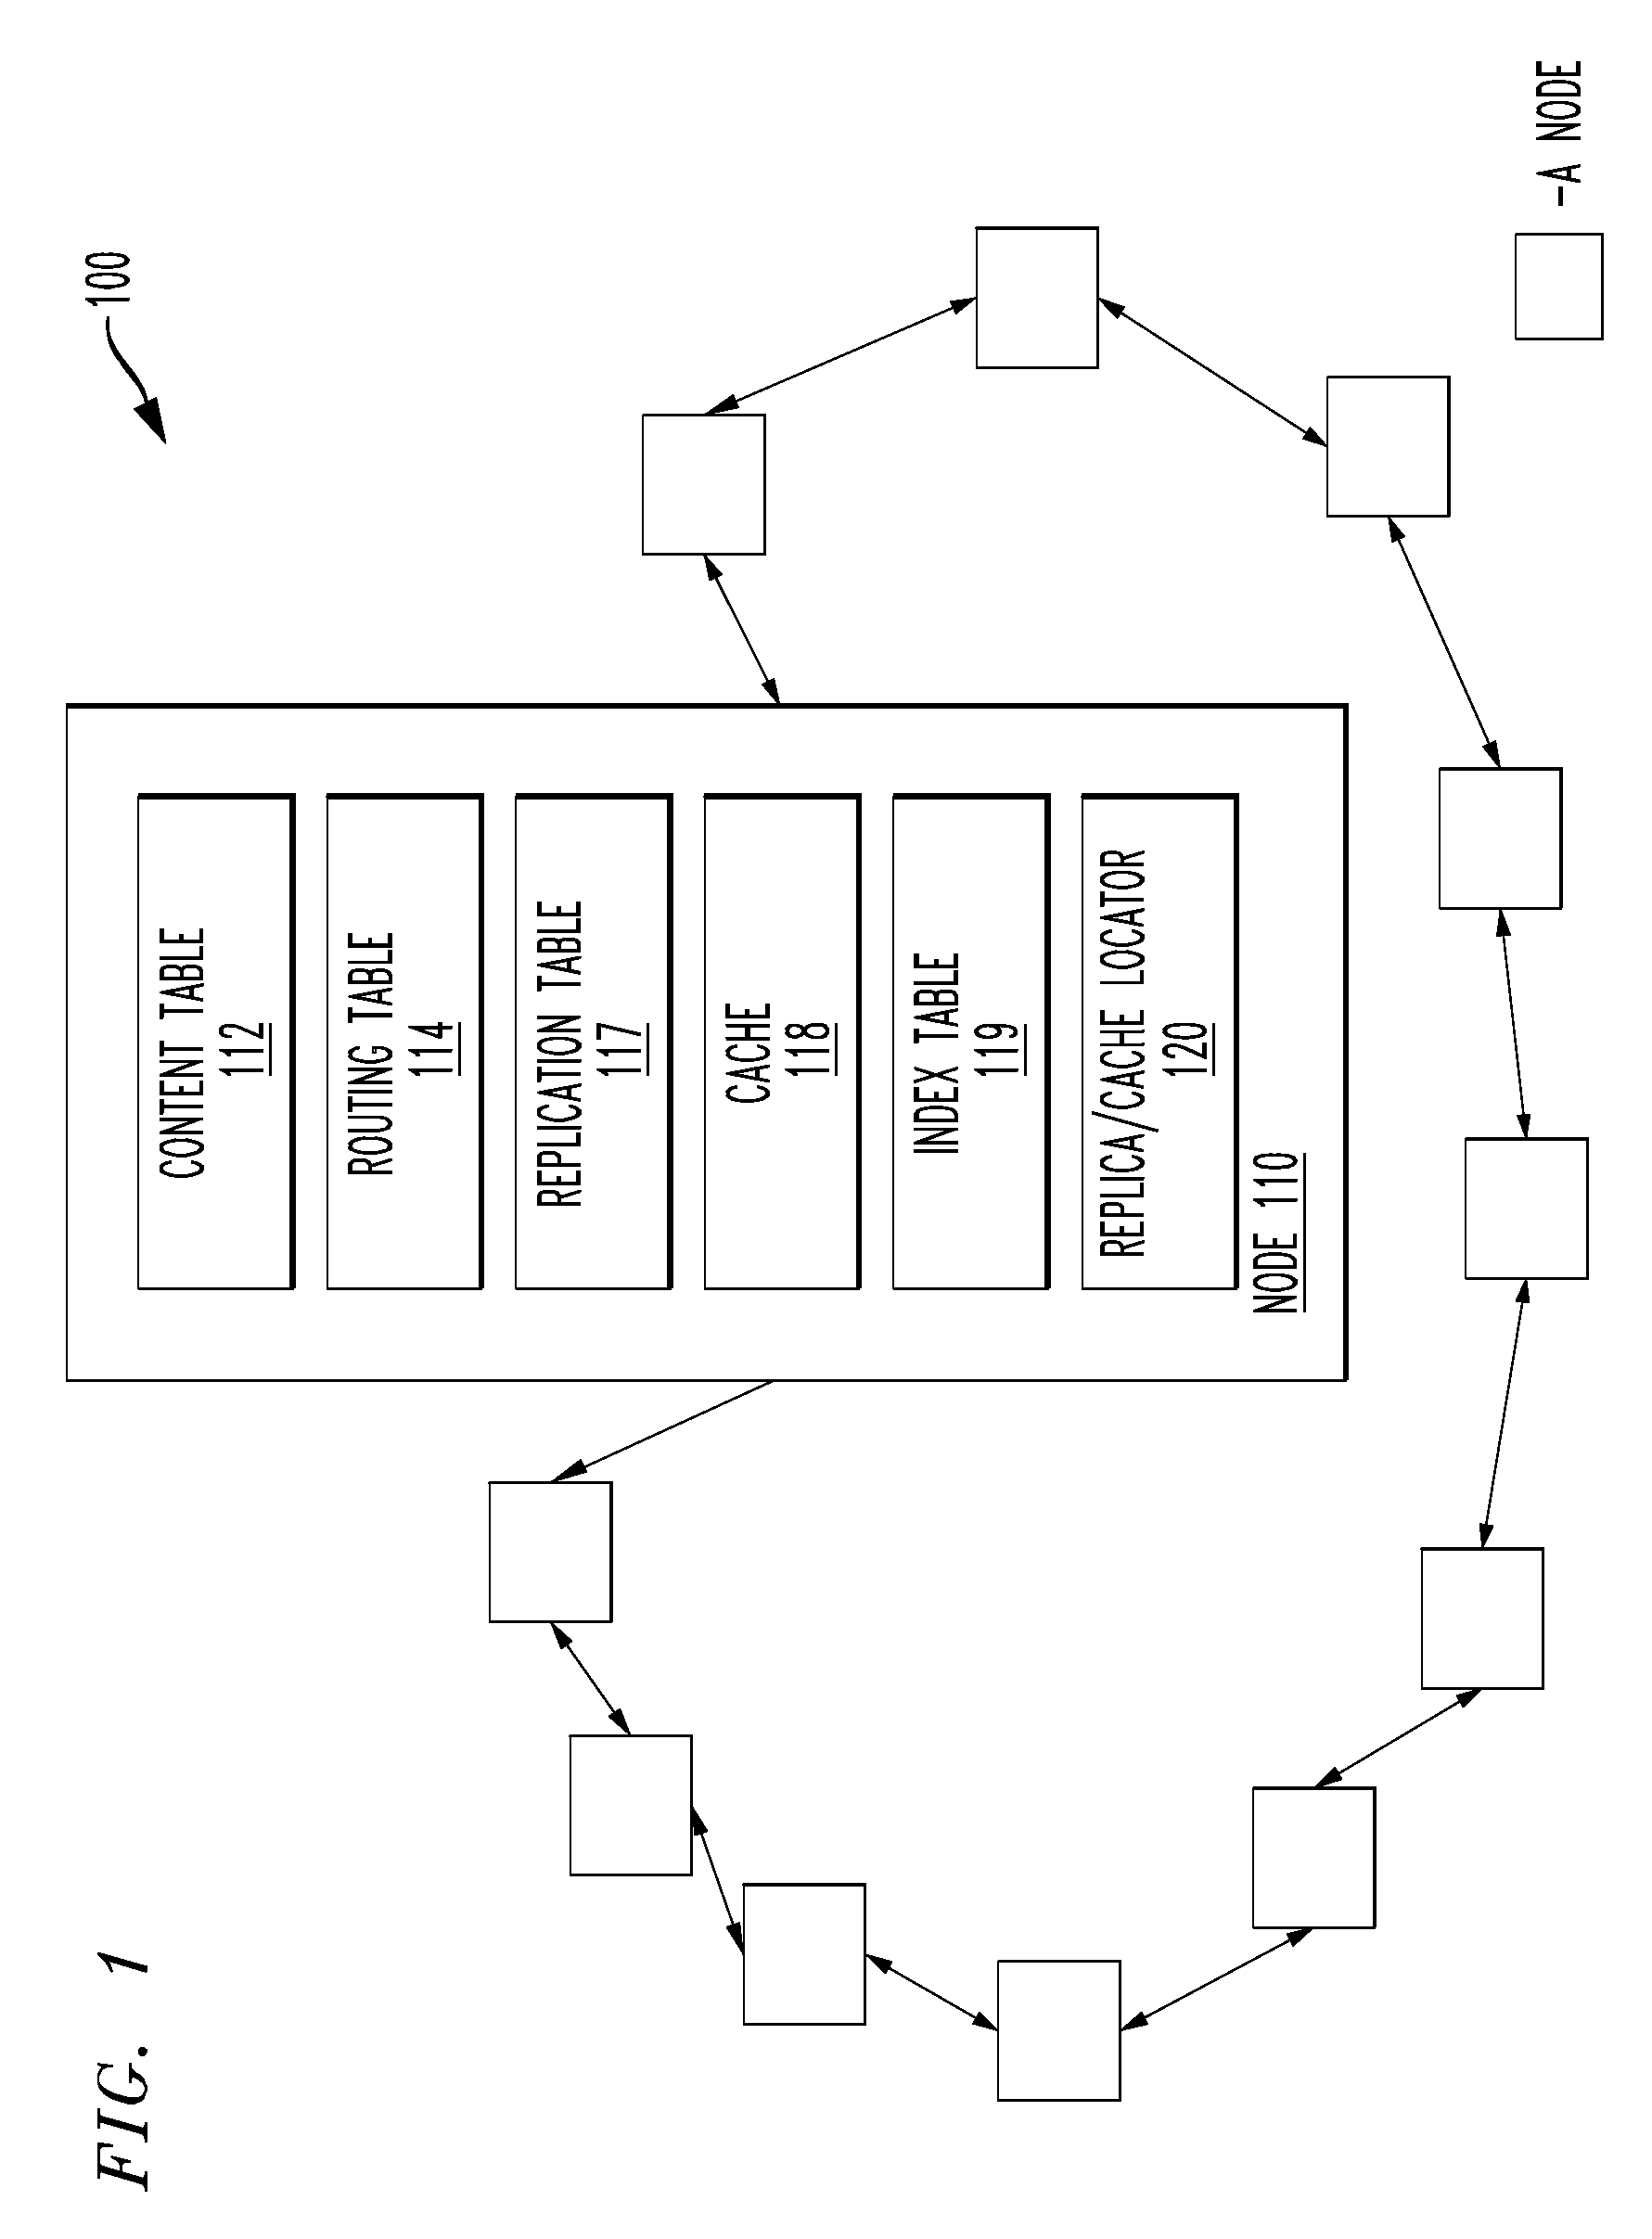 Replica/cache locator, an overlay network and a method to locate replication tables and caches therein